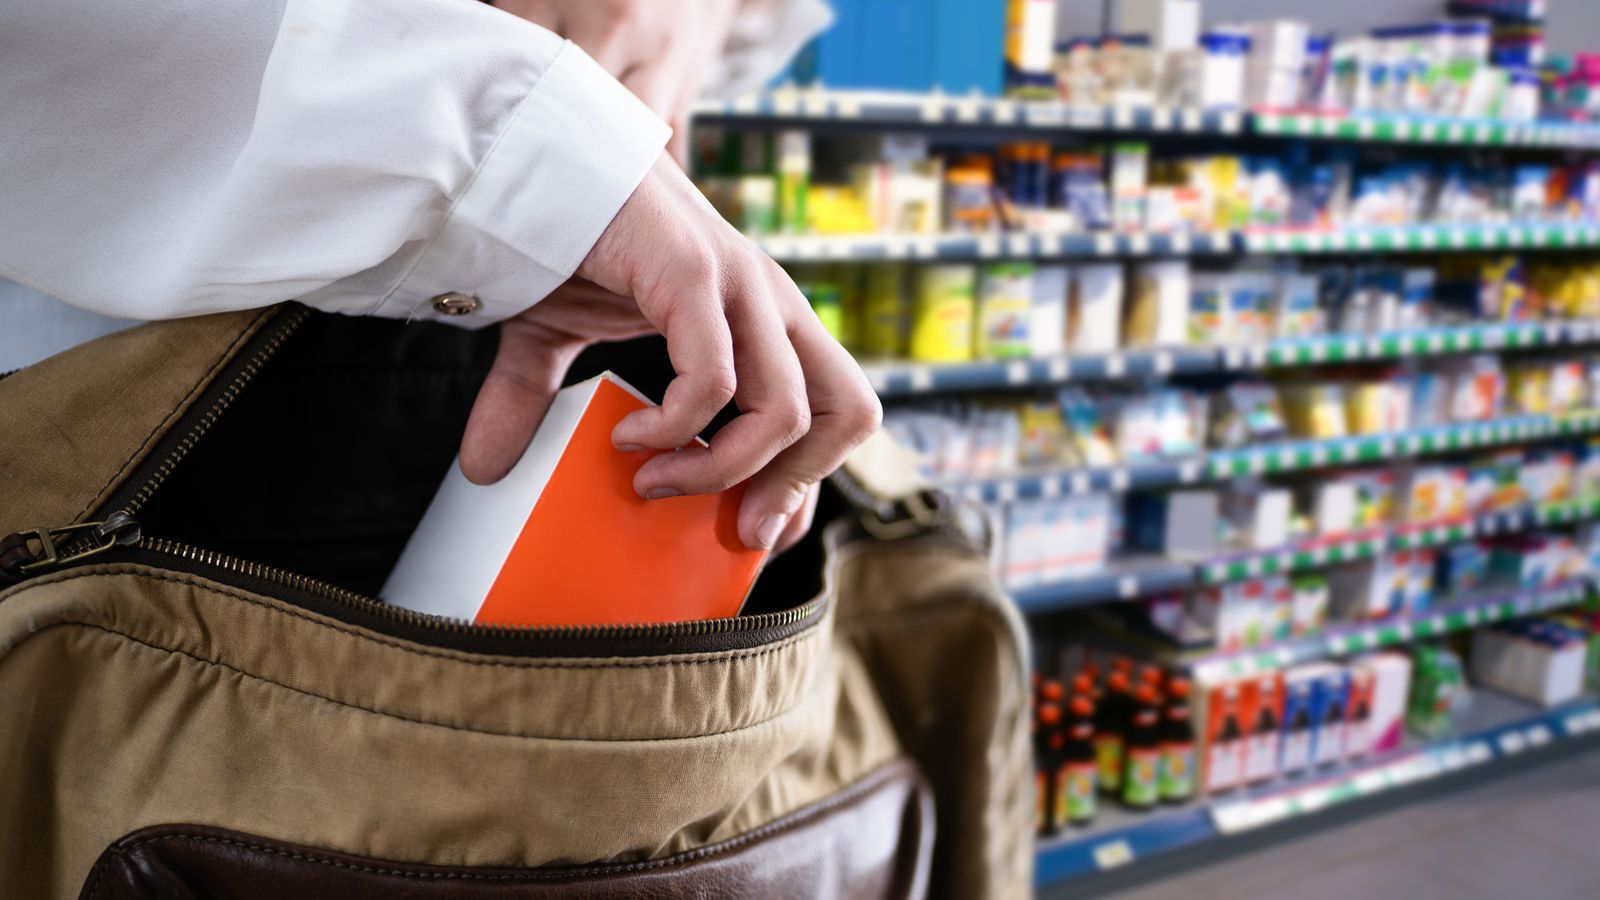 Shoplifting offences in England and Wales rise to highest level in 20 years 